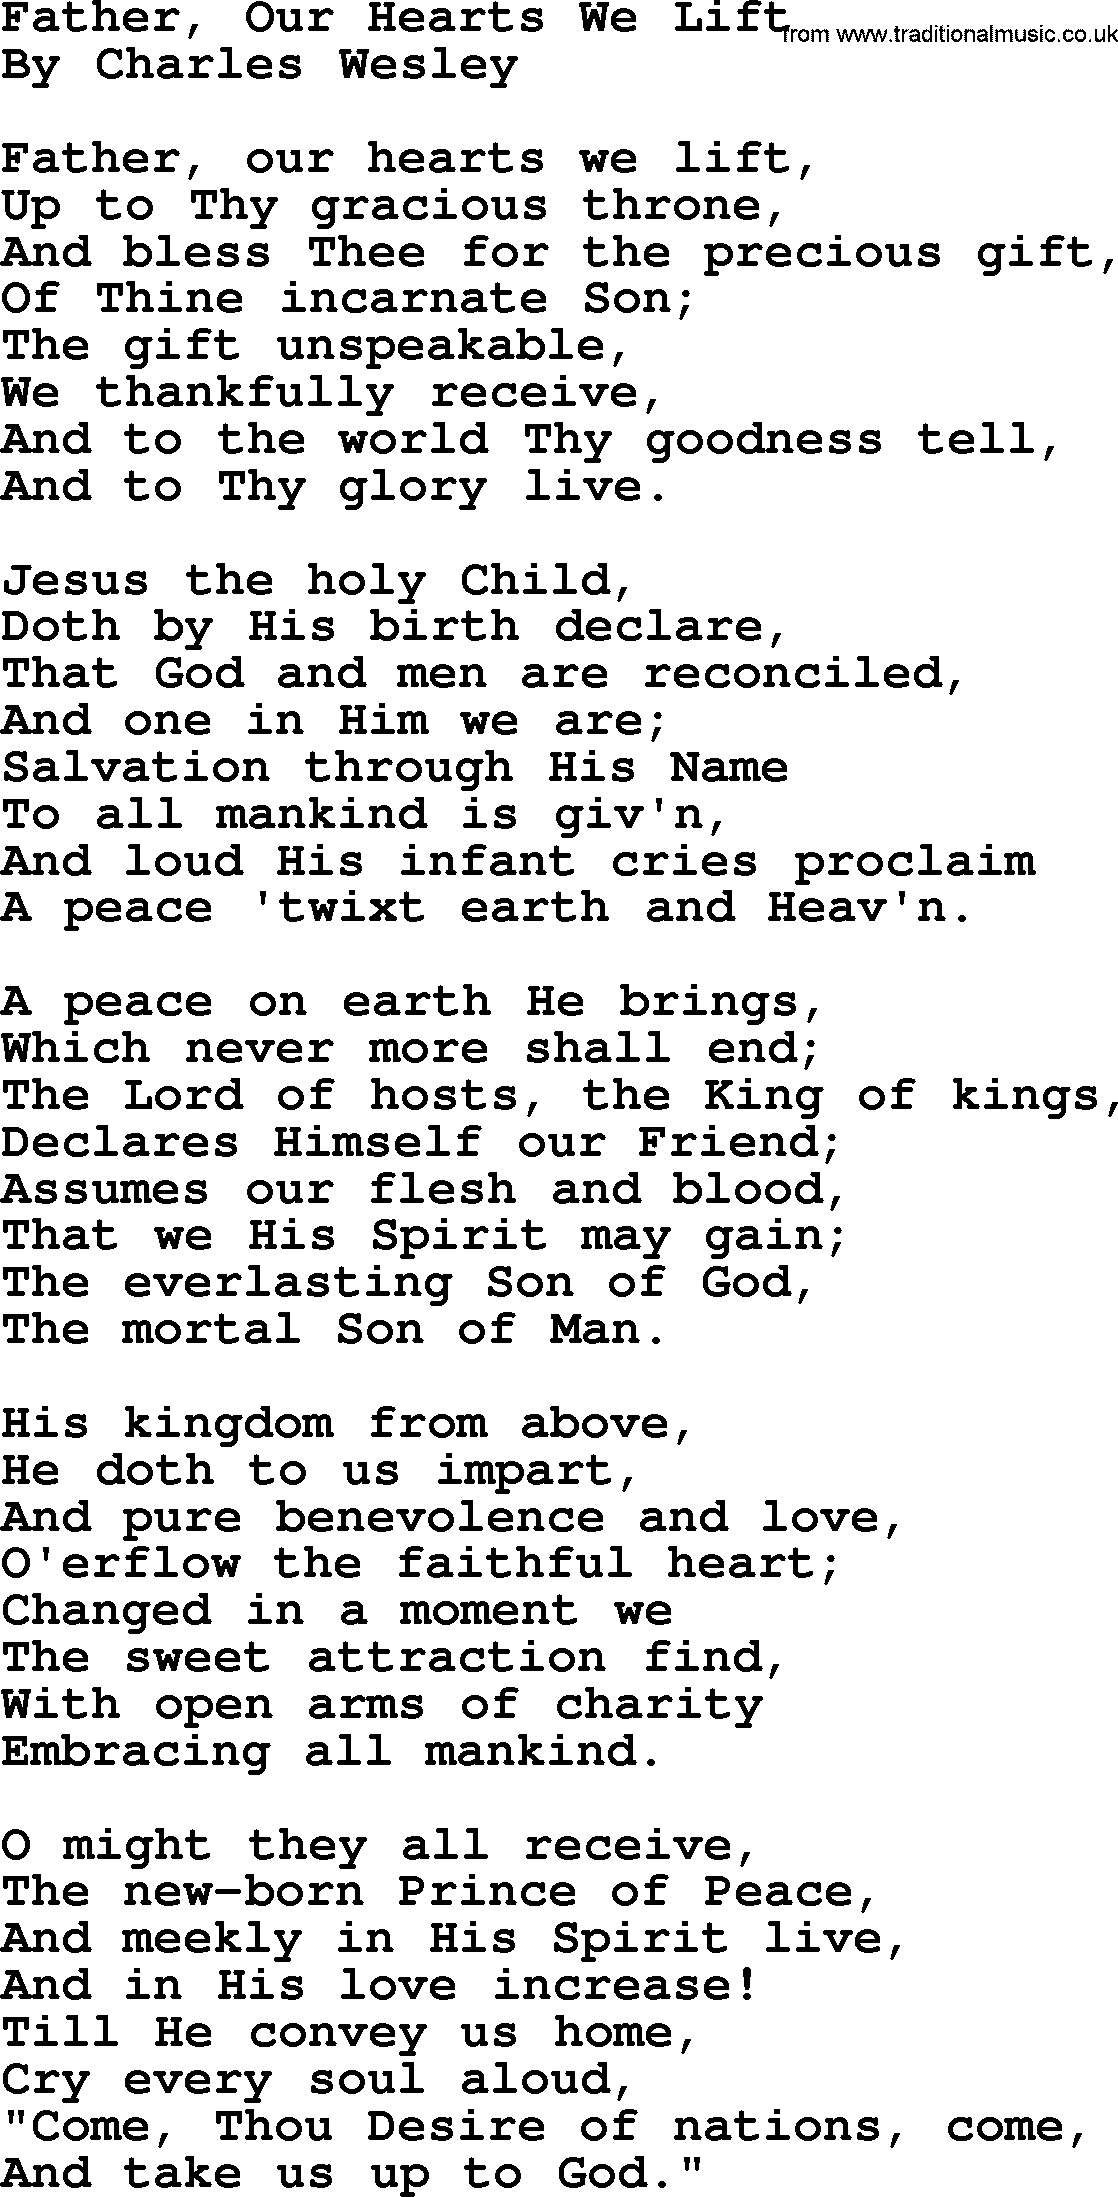 Charles Wesley hymn: Father, Our Hearts We Lift, lyrics